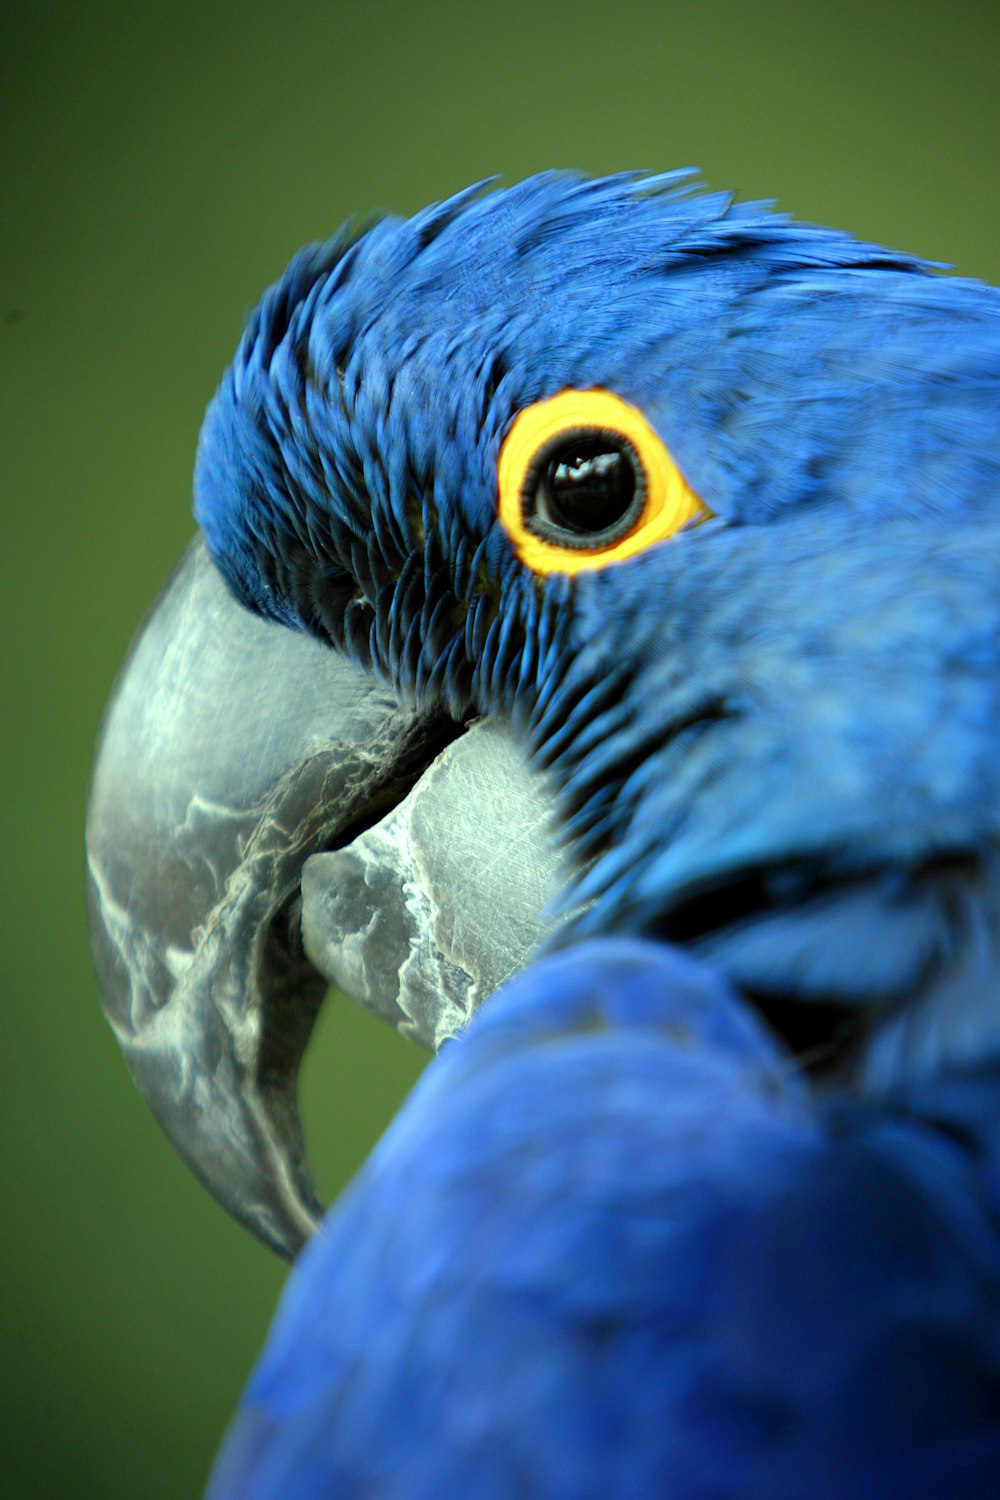 a blue bird with yellow eyes